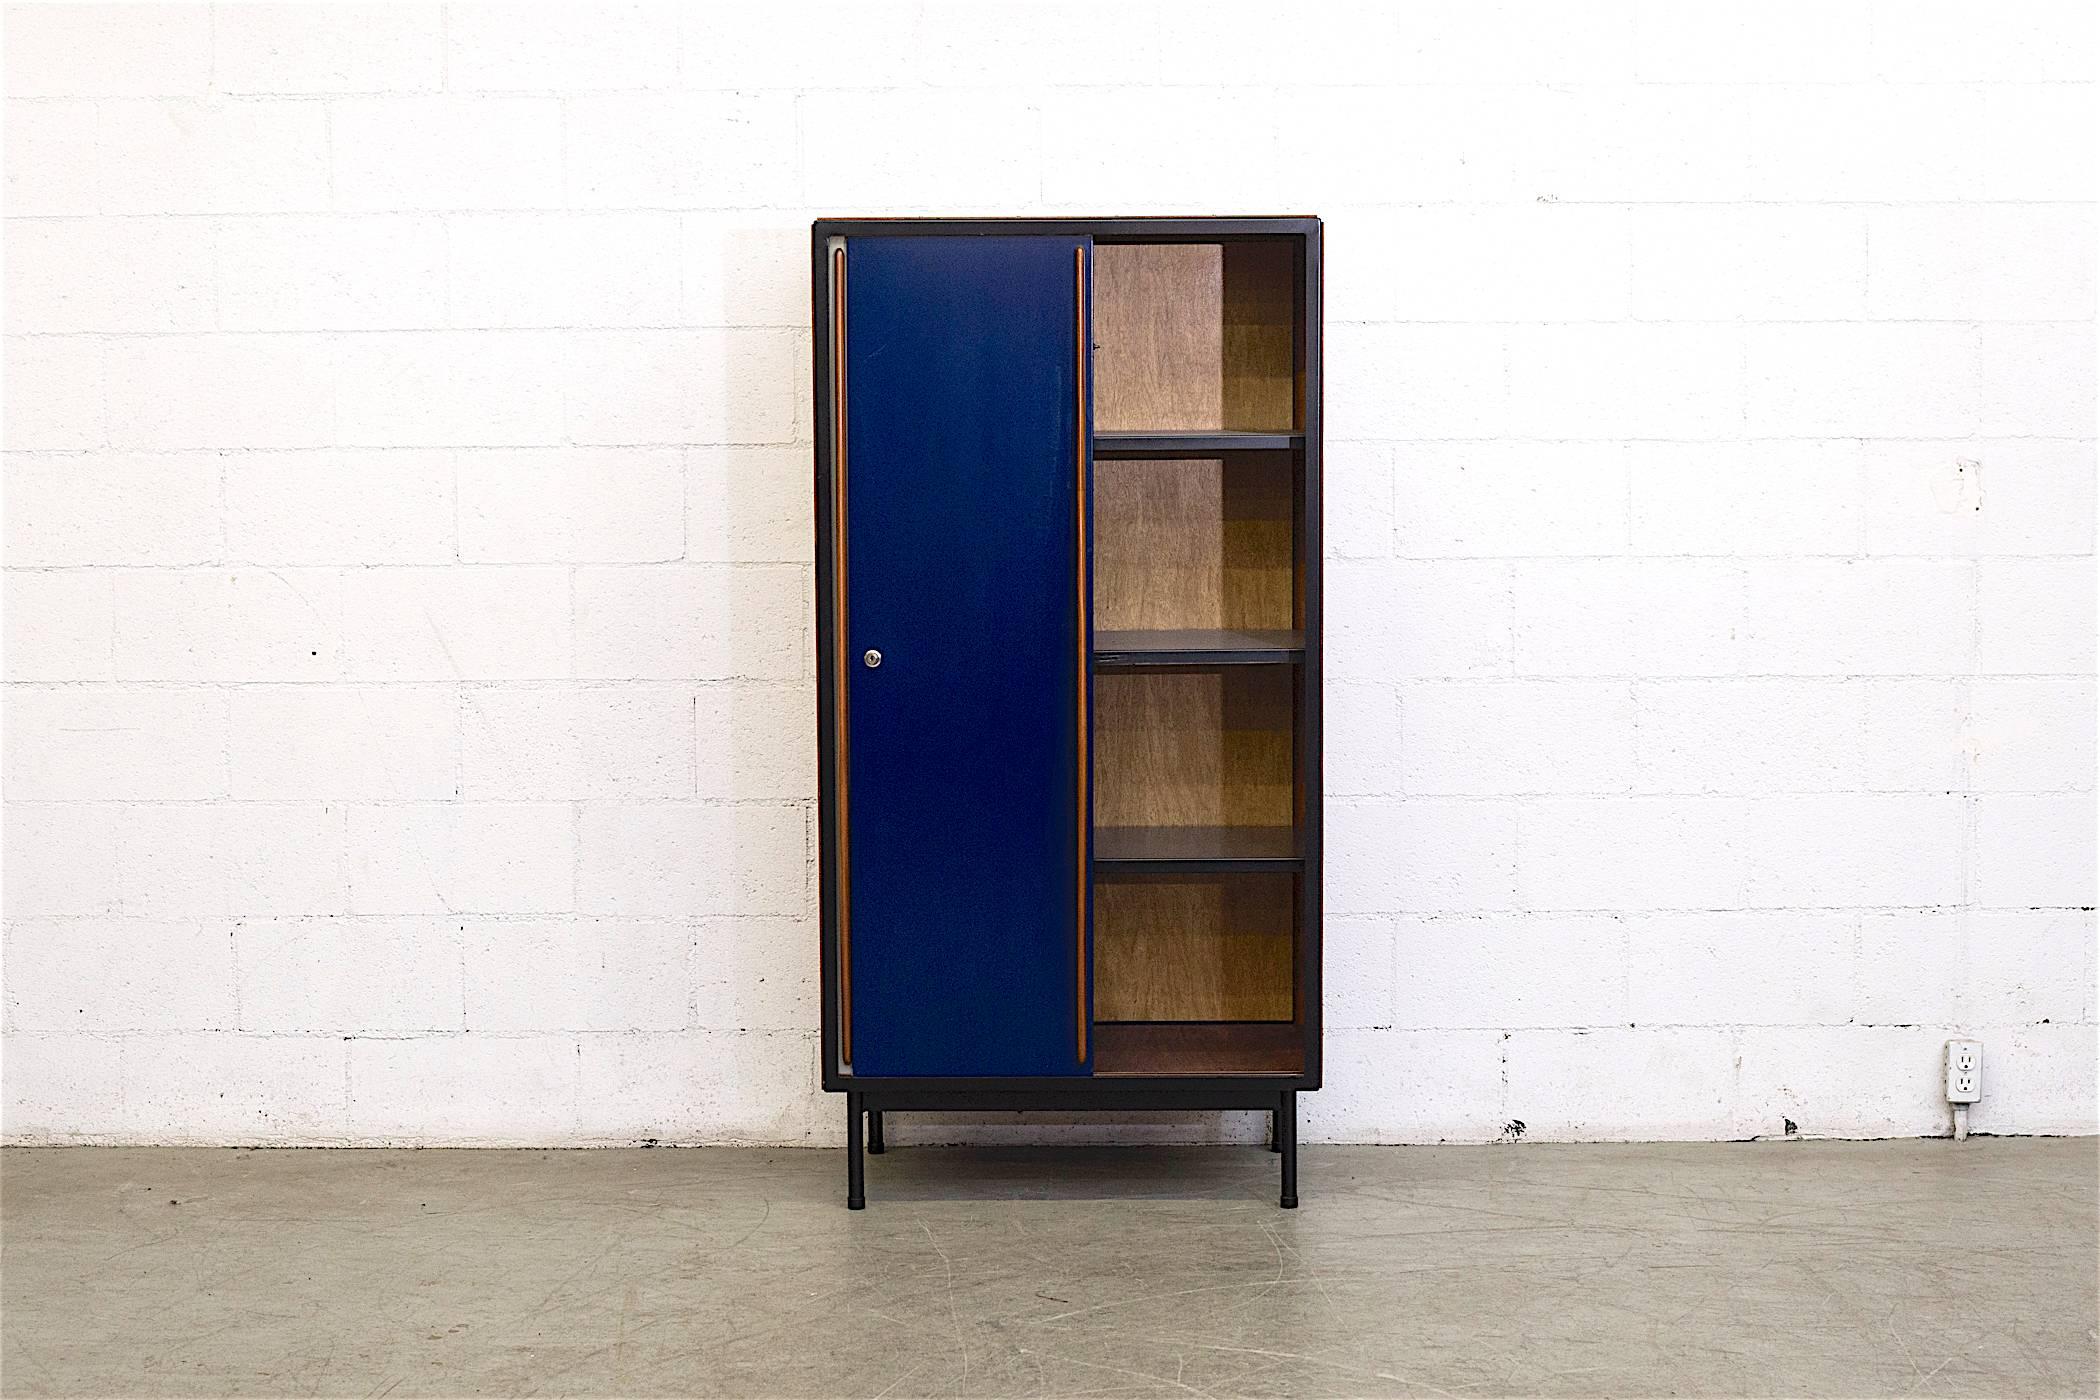 Rare Industrial wardrobe designed By Willy Van Der Meeren. Enameled metal two-toned sliding doors in light grey and dark blue with organic teak carved handles. Doors open to reveal one side of wardrobe space, enameled metal shelves on the other. The